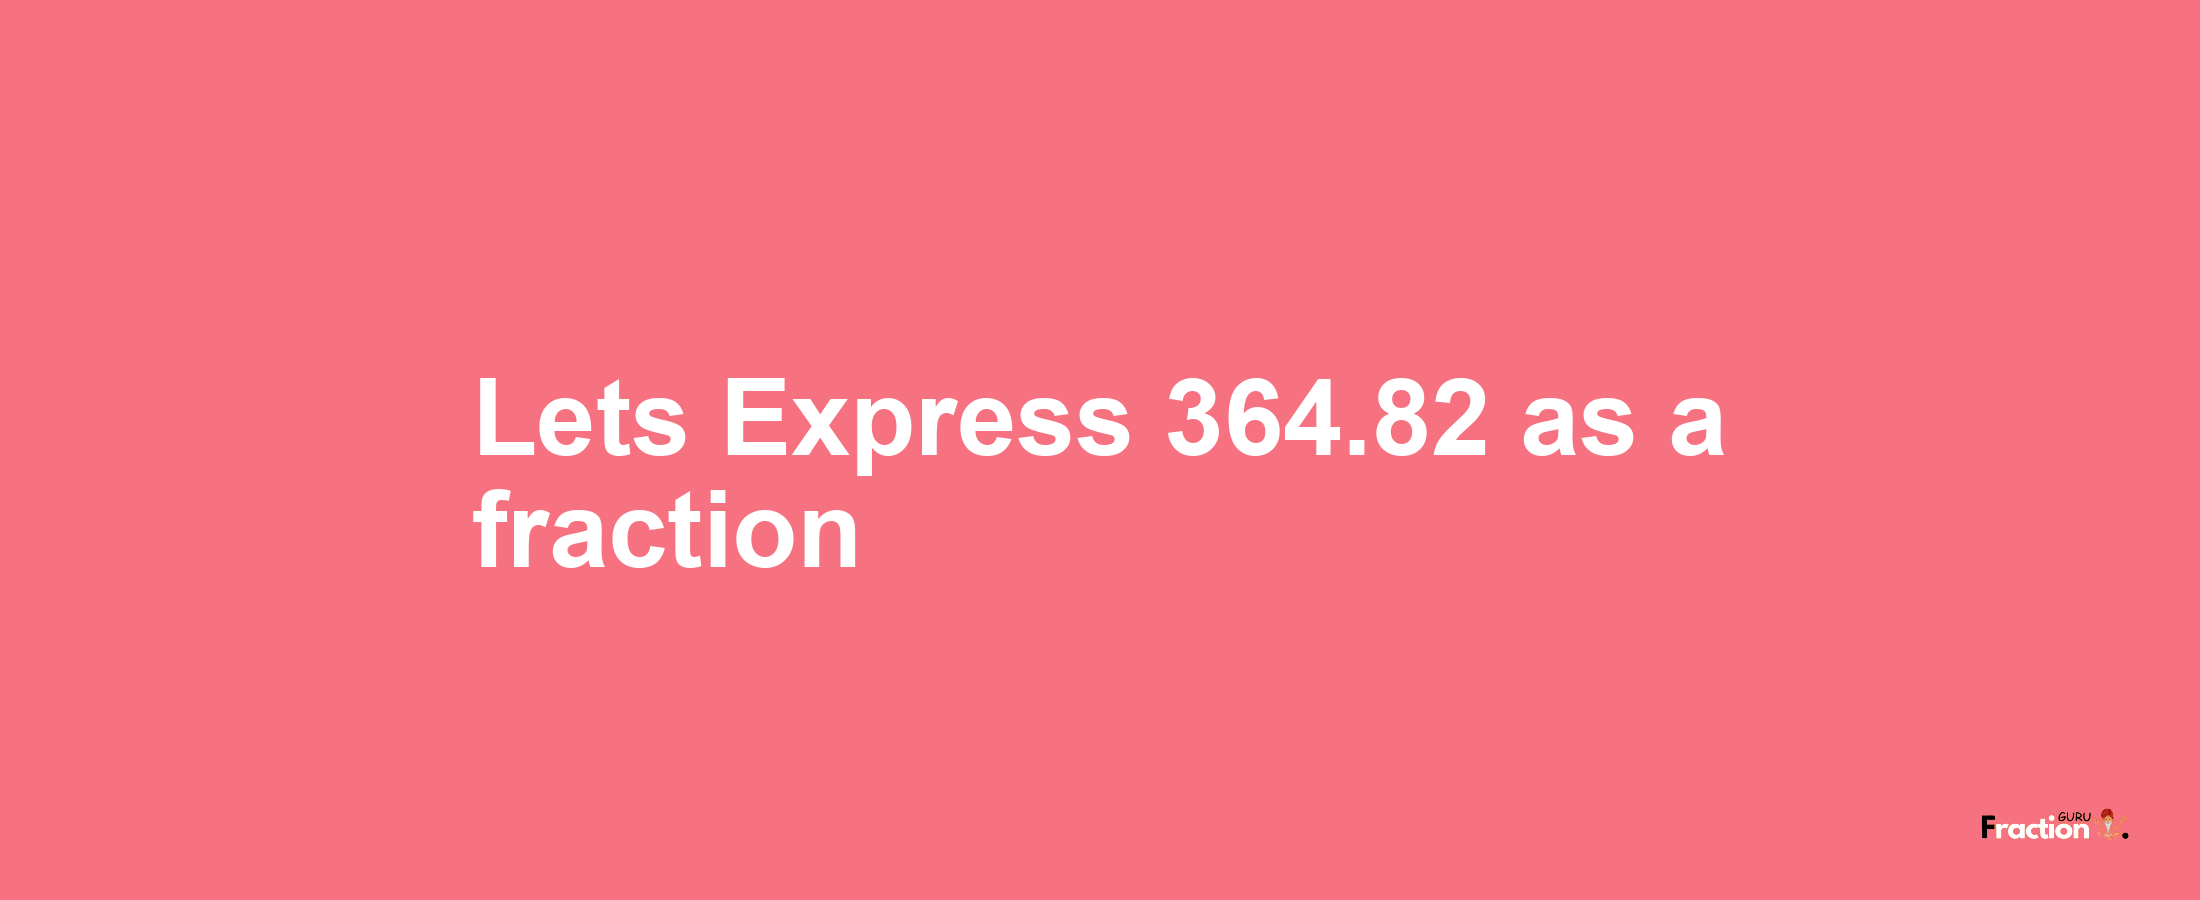 Lets Express 364.82 as afraction